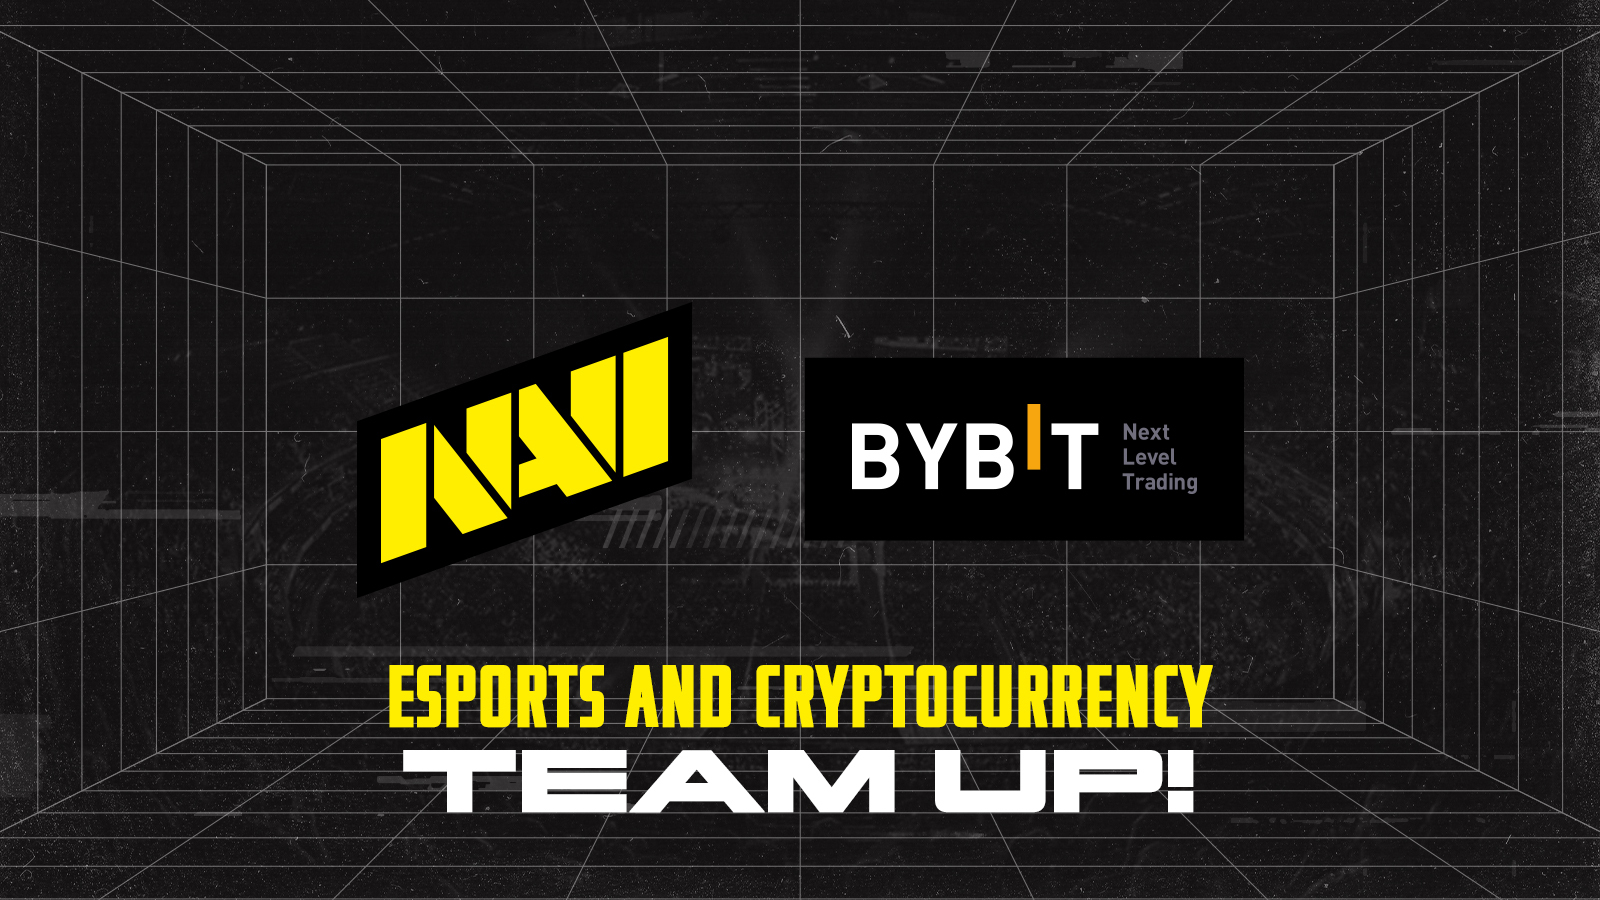 Exchange Bybit establishes a partnership with the leading e-sports organization NAVI